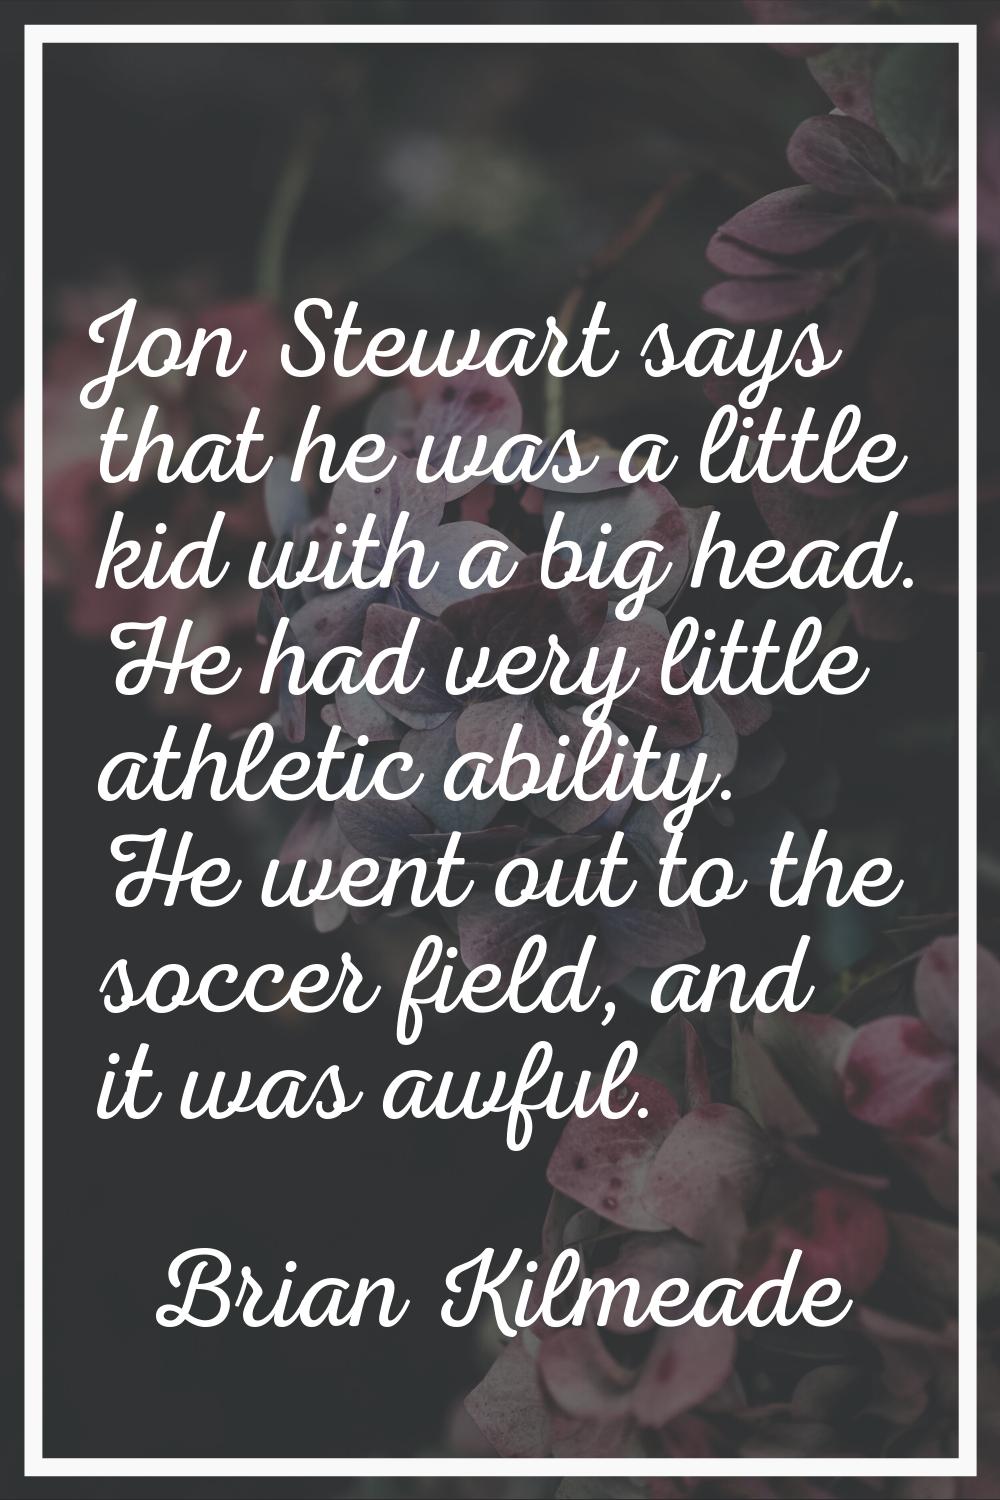 Jon Stewart says that he was a little kid with a big head. He had very little athletic ability. He 